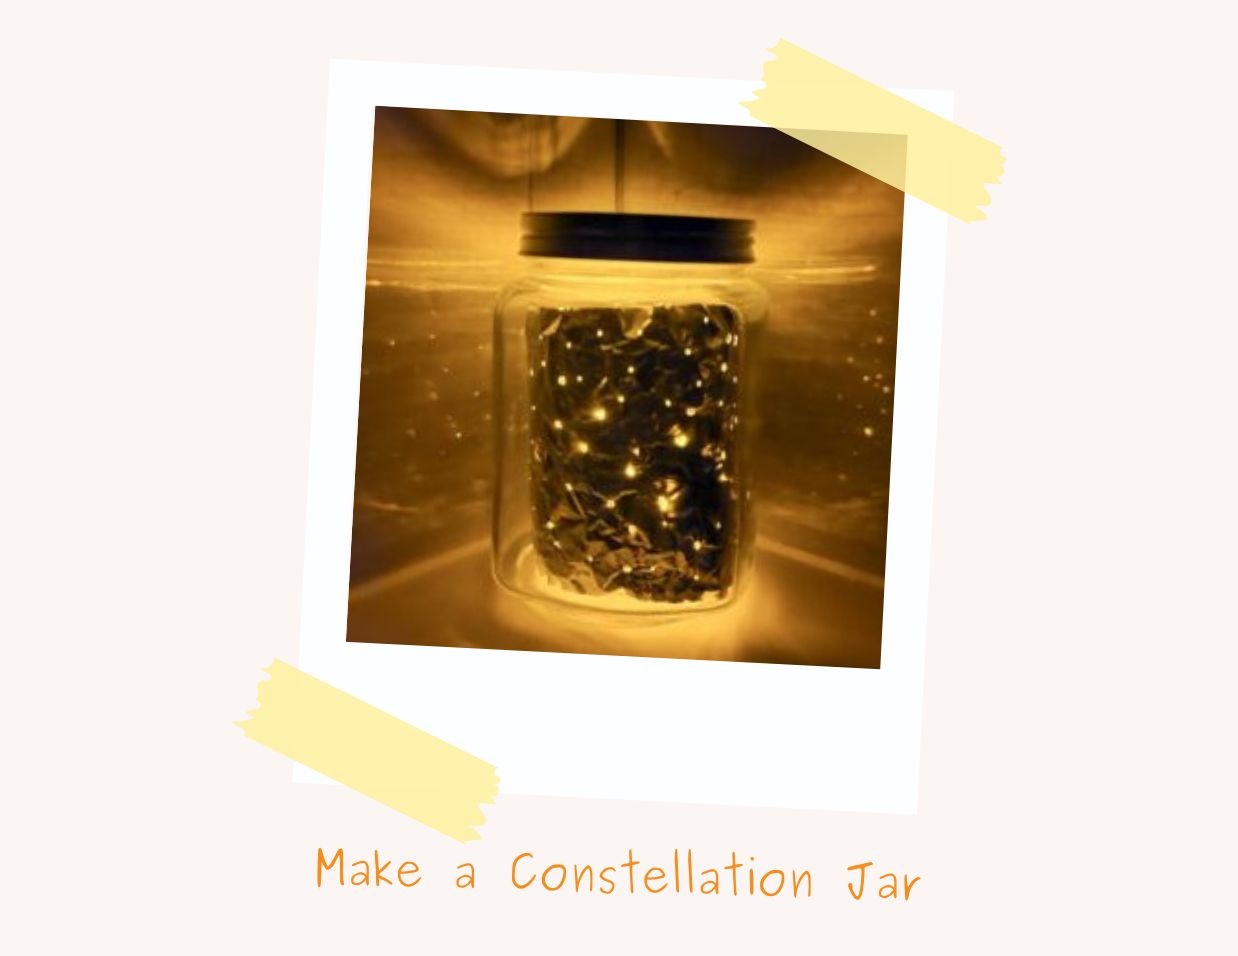 Image of completed constellation jar